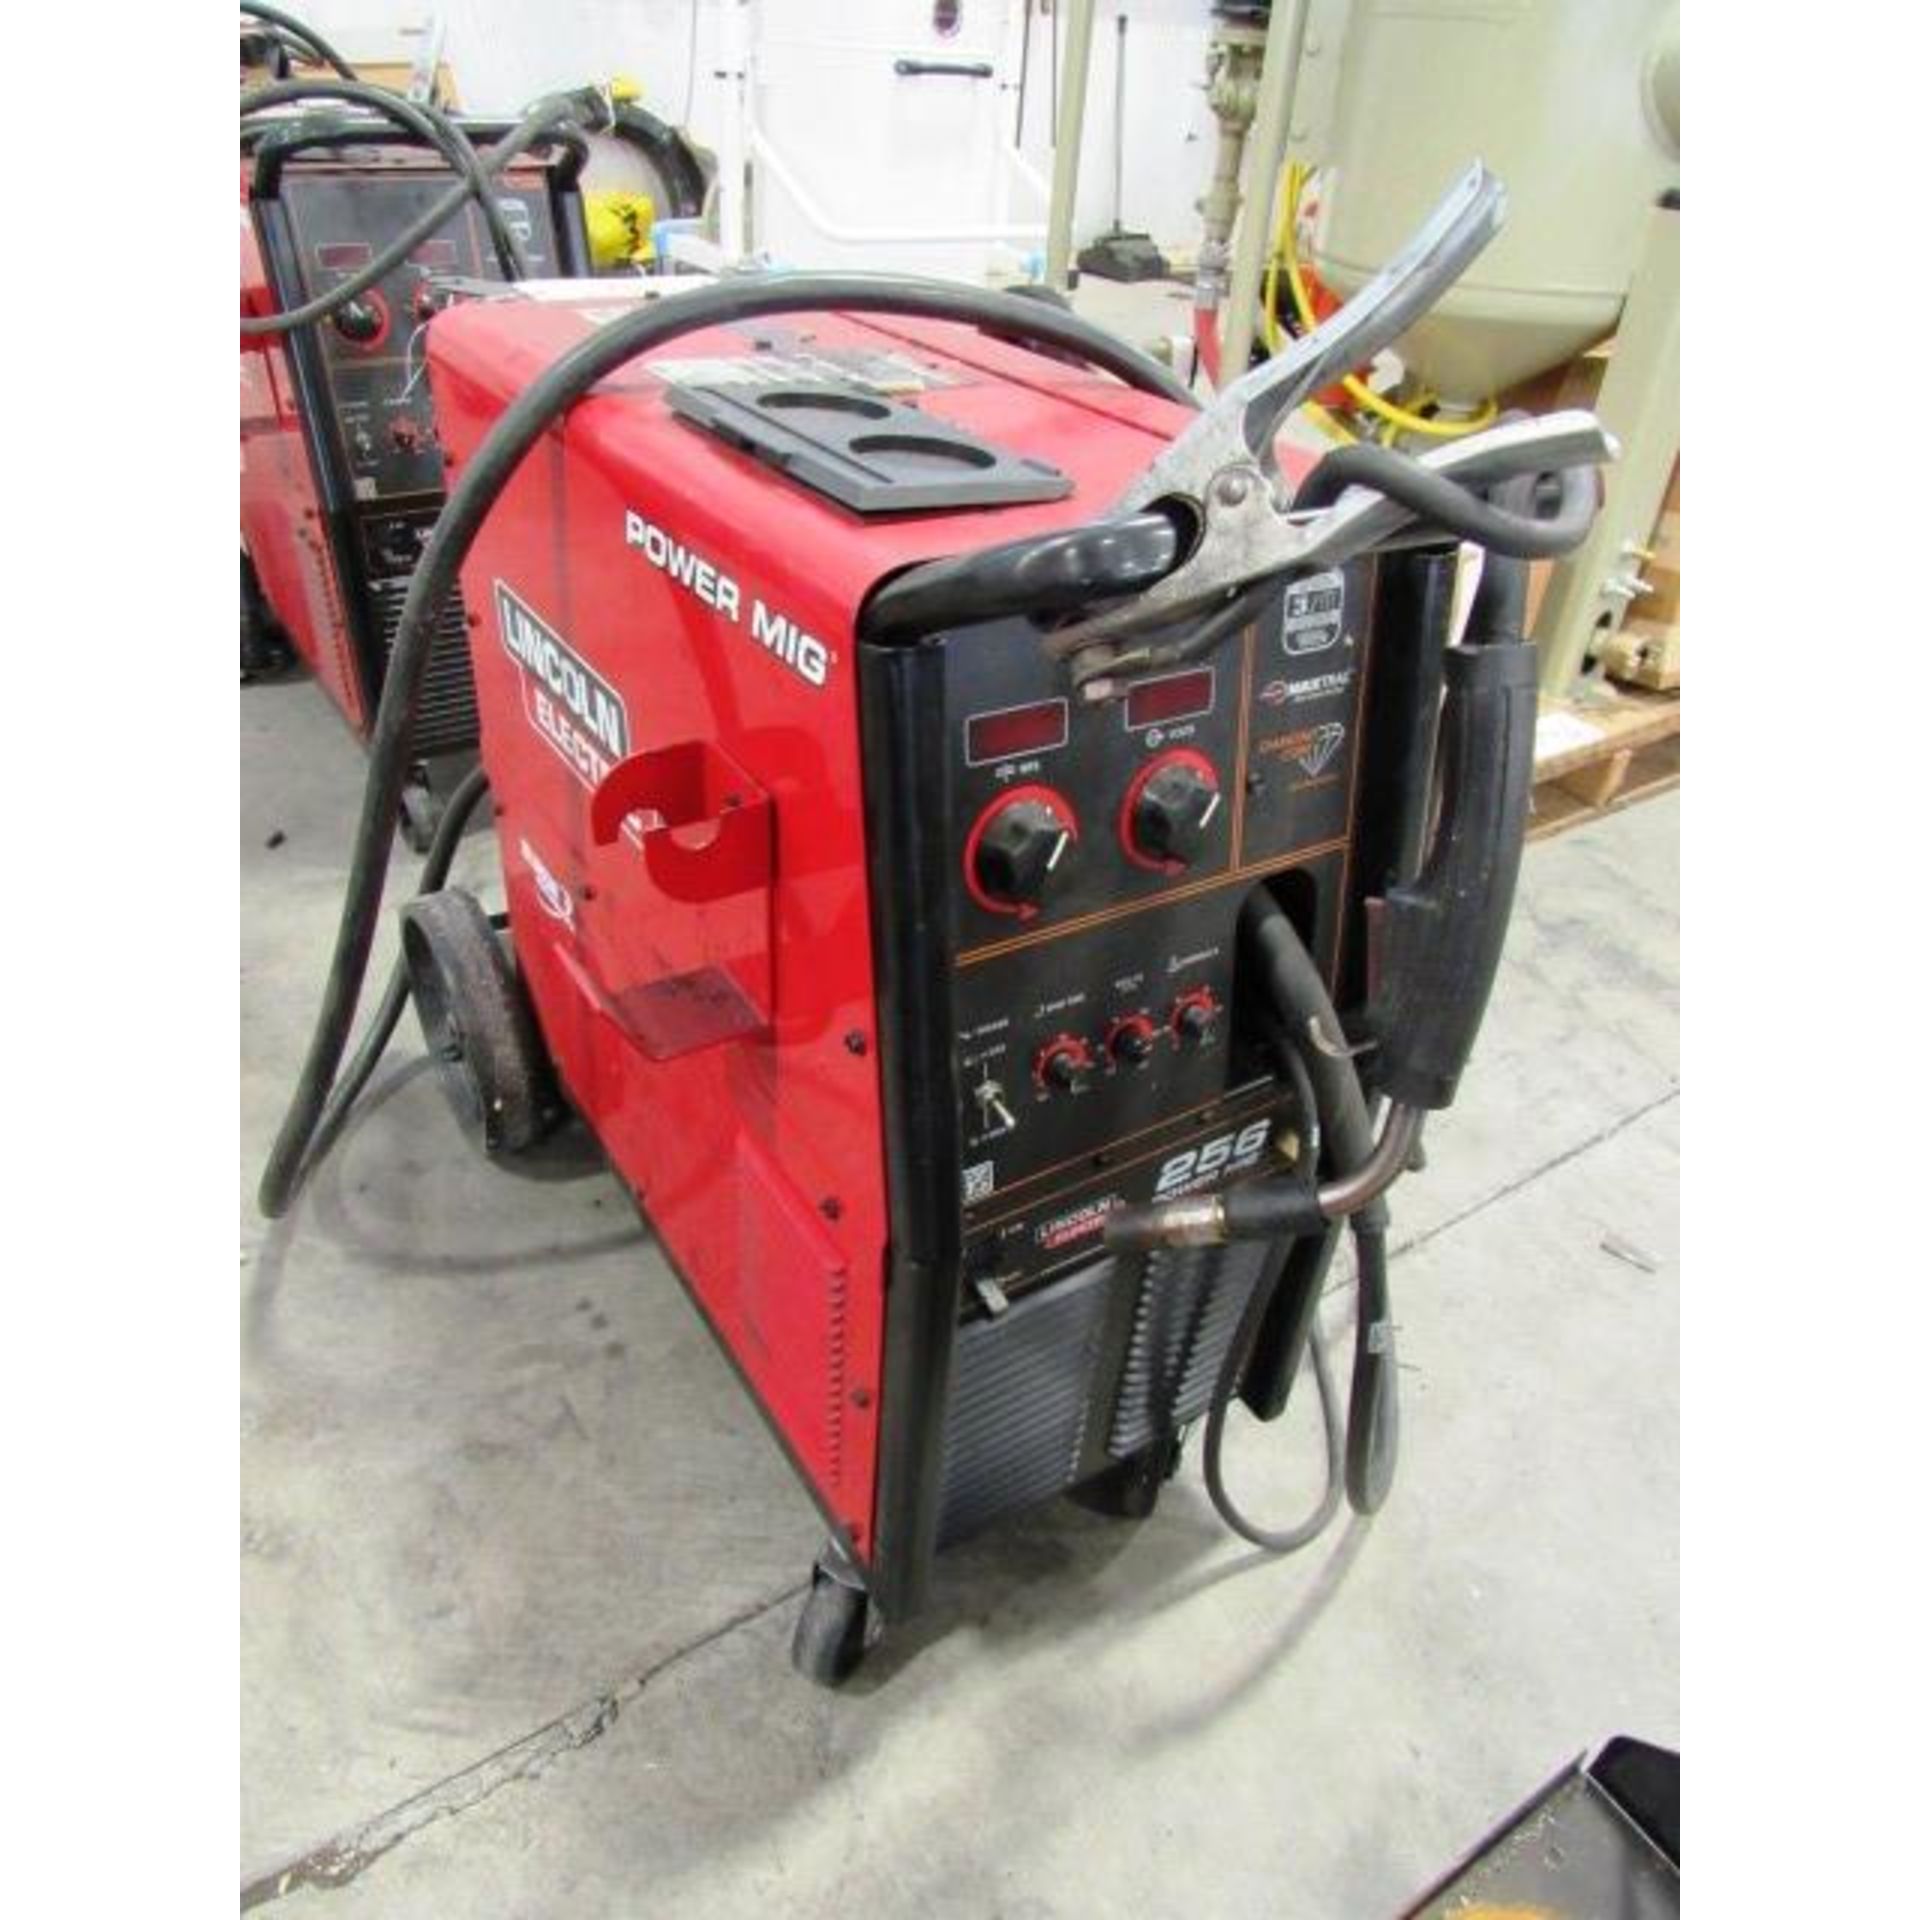  Choice Of Lots 282 283 284 285 Lincoln 256 Power Mig Welder Sn 